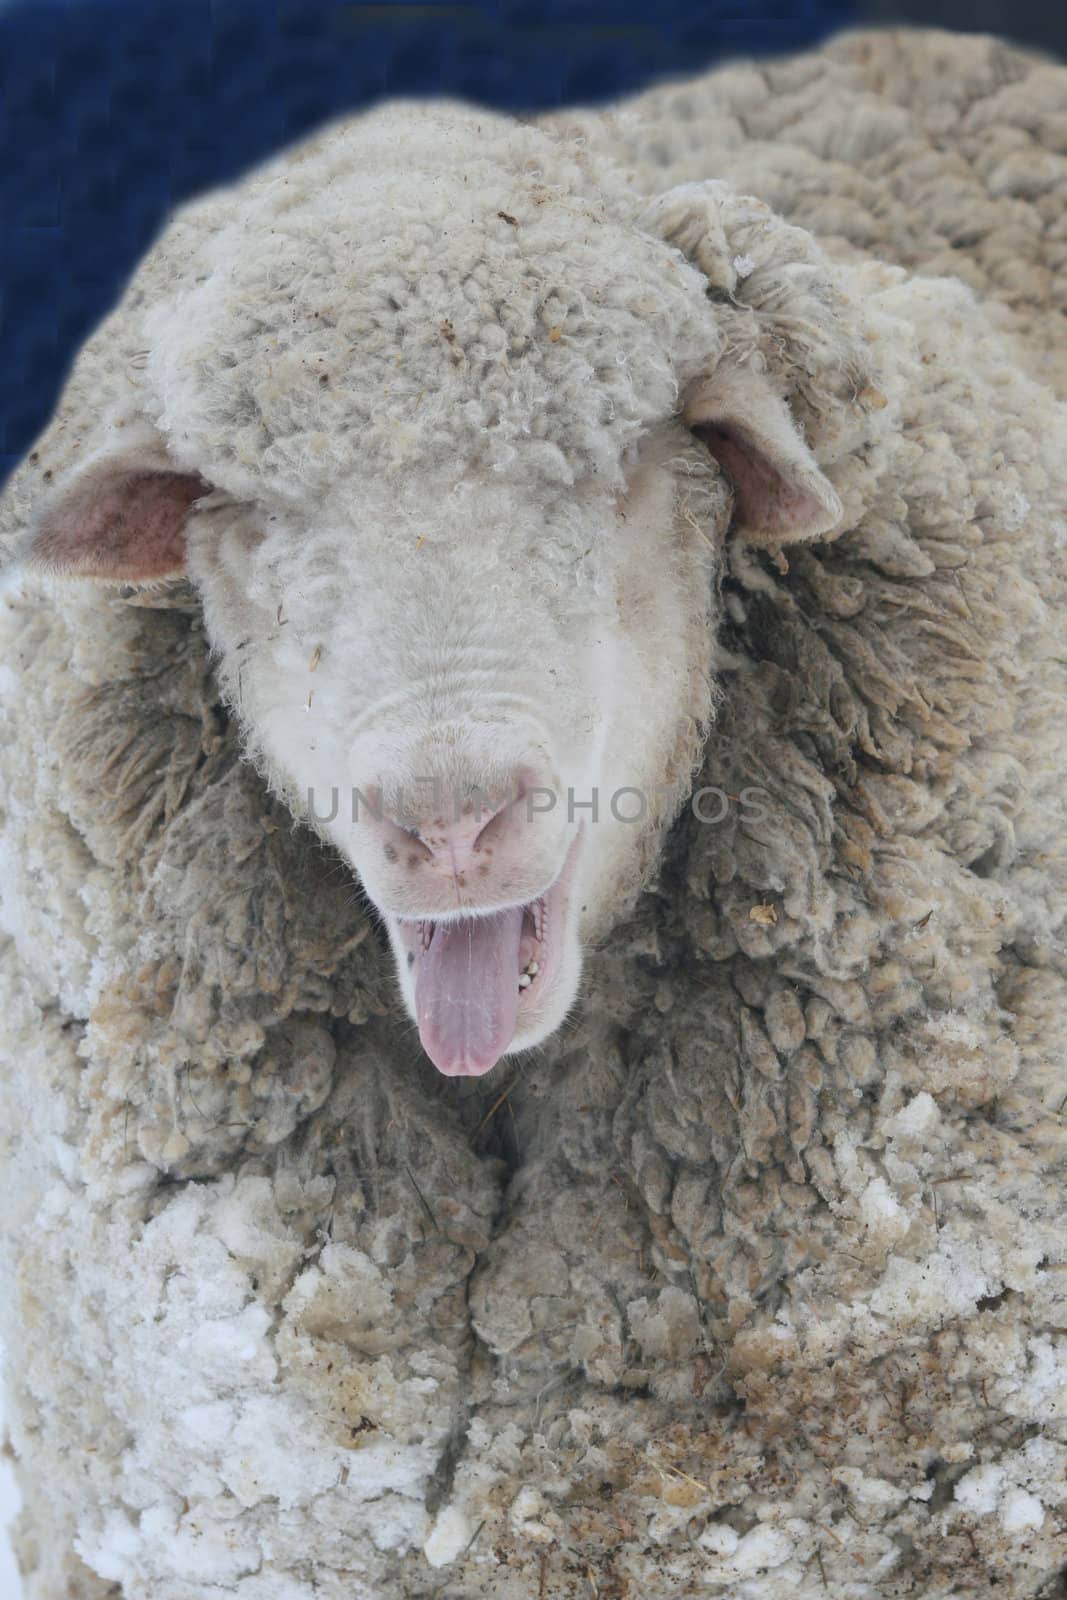 Sheep (Ovis aries) baaing with her tongue out